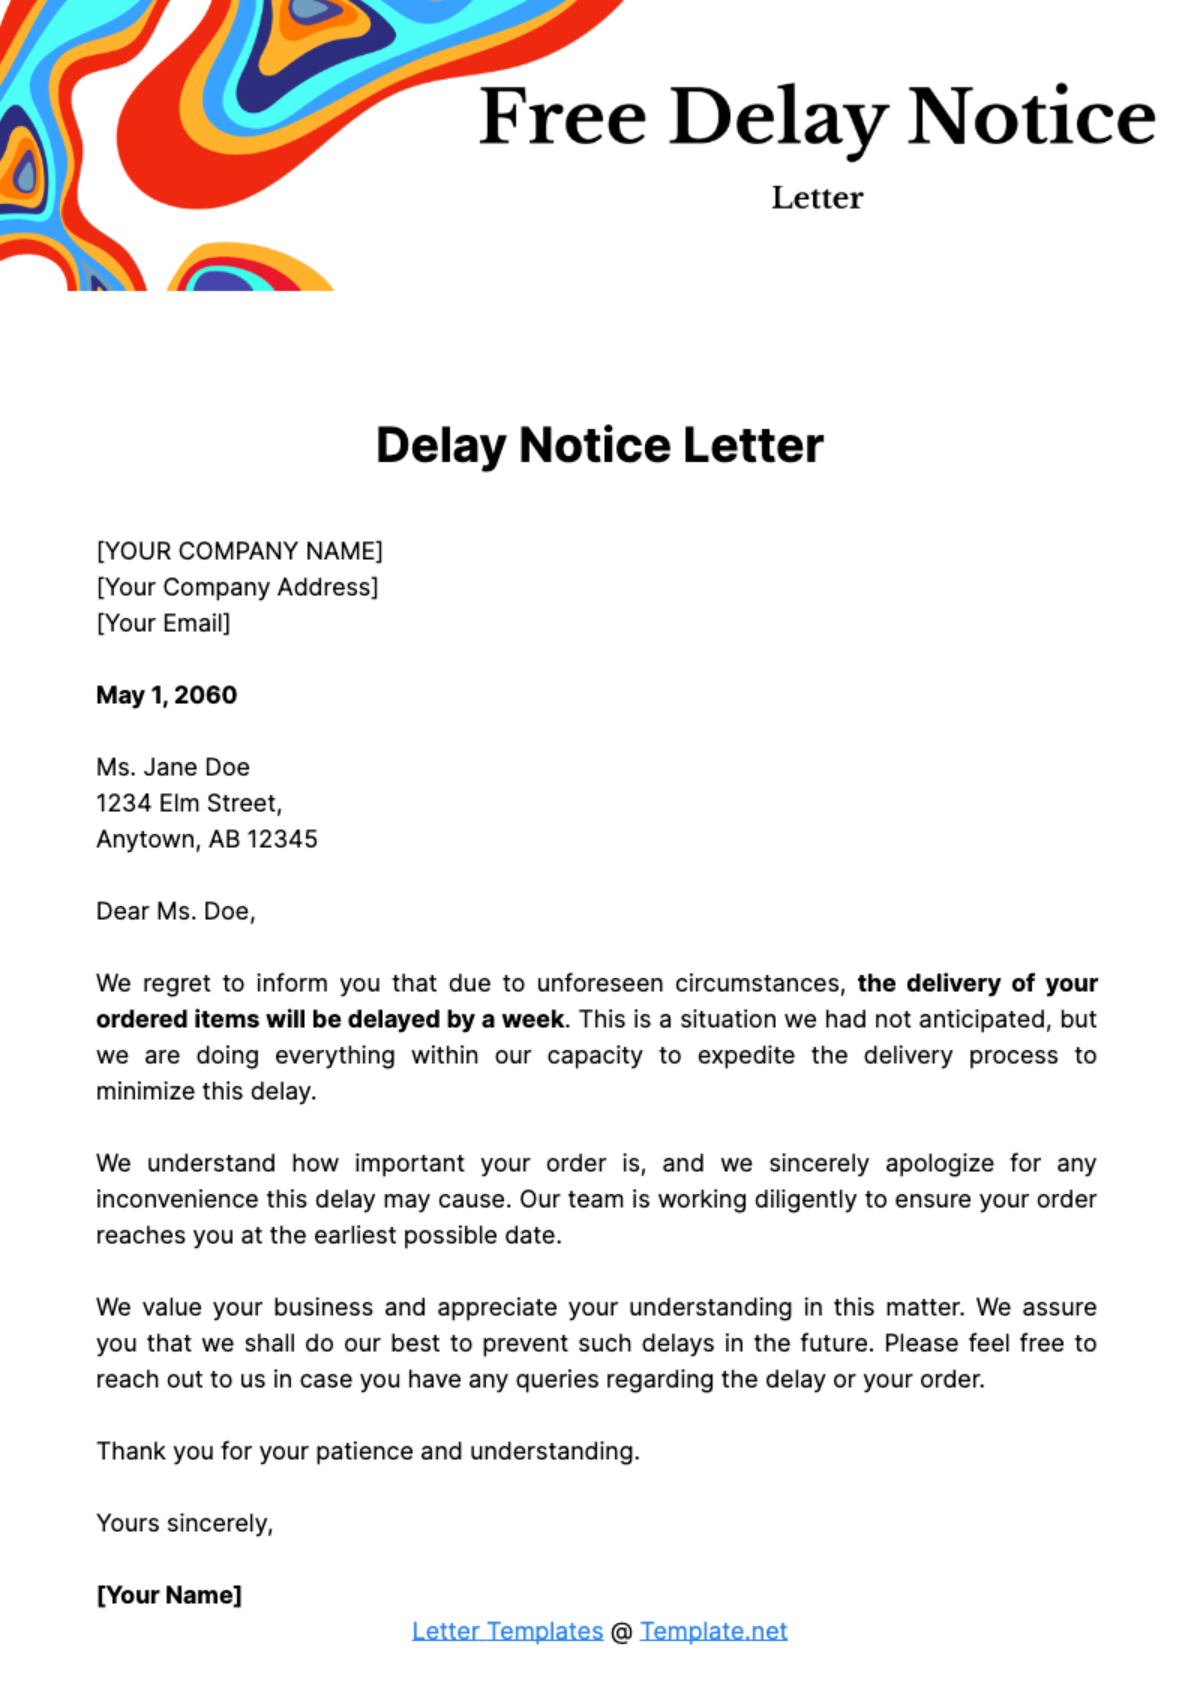 Free Delay Notice Letter Template